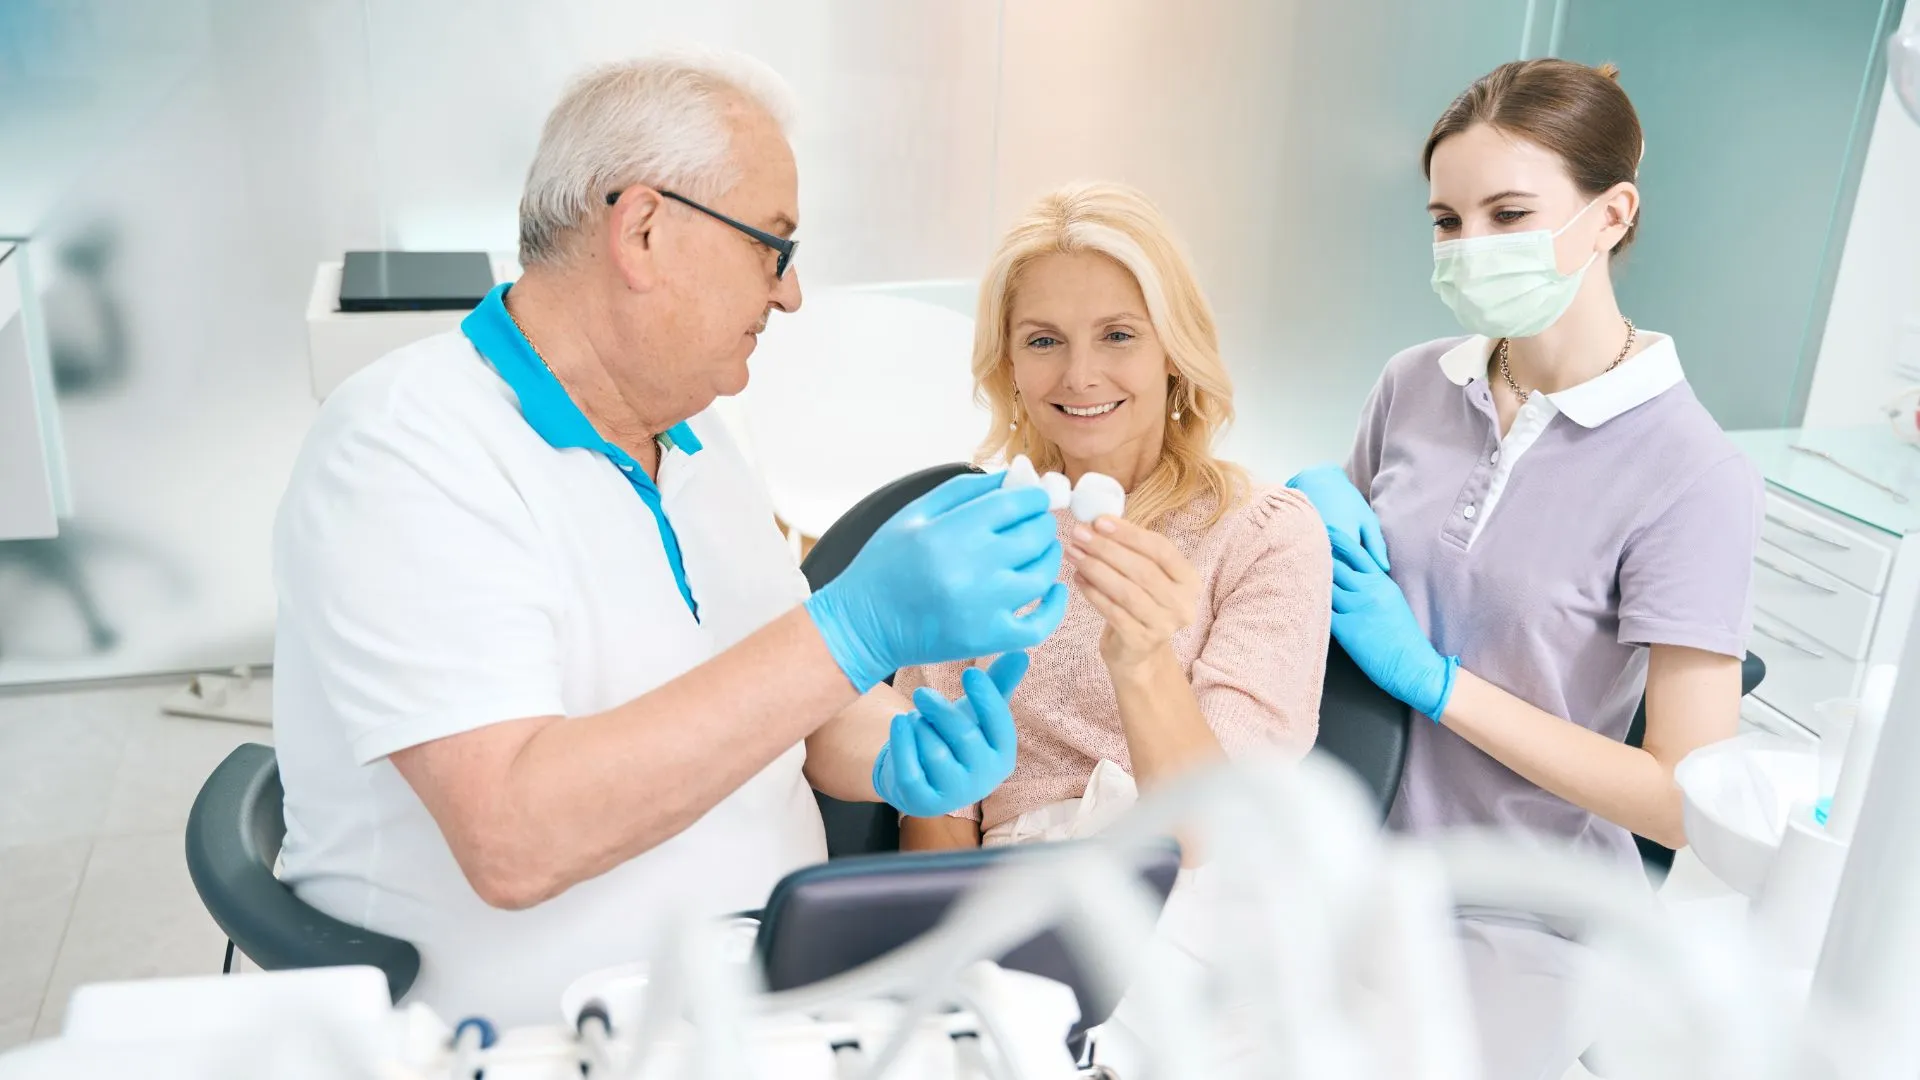 Cosmetic Dentistry Options for Adults